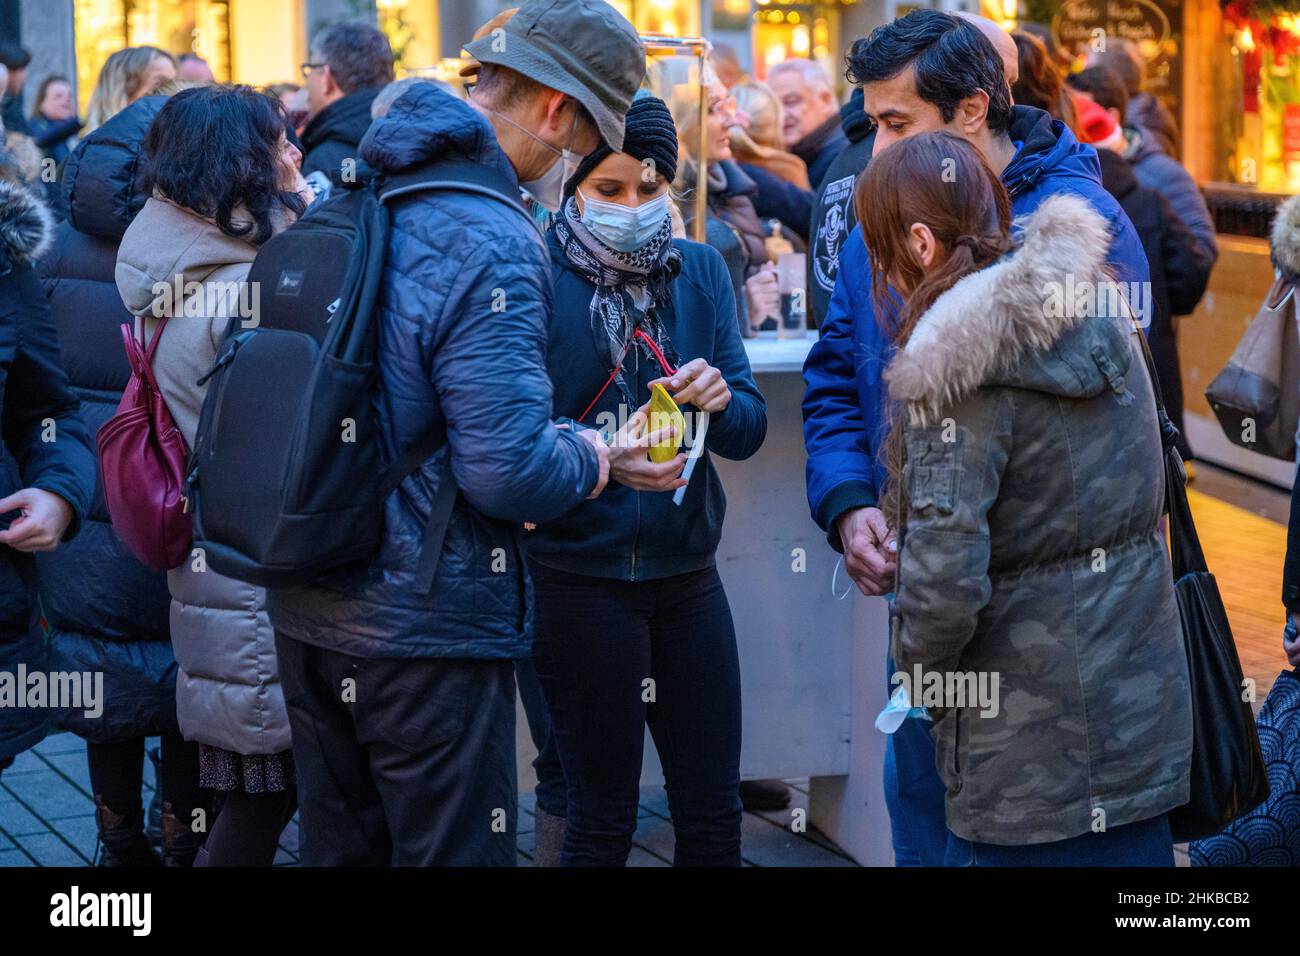 Vaccination cards are checked at the entrance to a Christmas market in the city centre of Düsseldorf, NRW, Germany on Dec. 11, 2021 Stock Photo